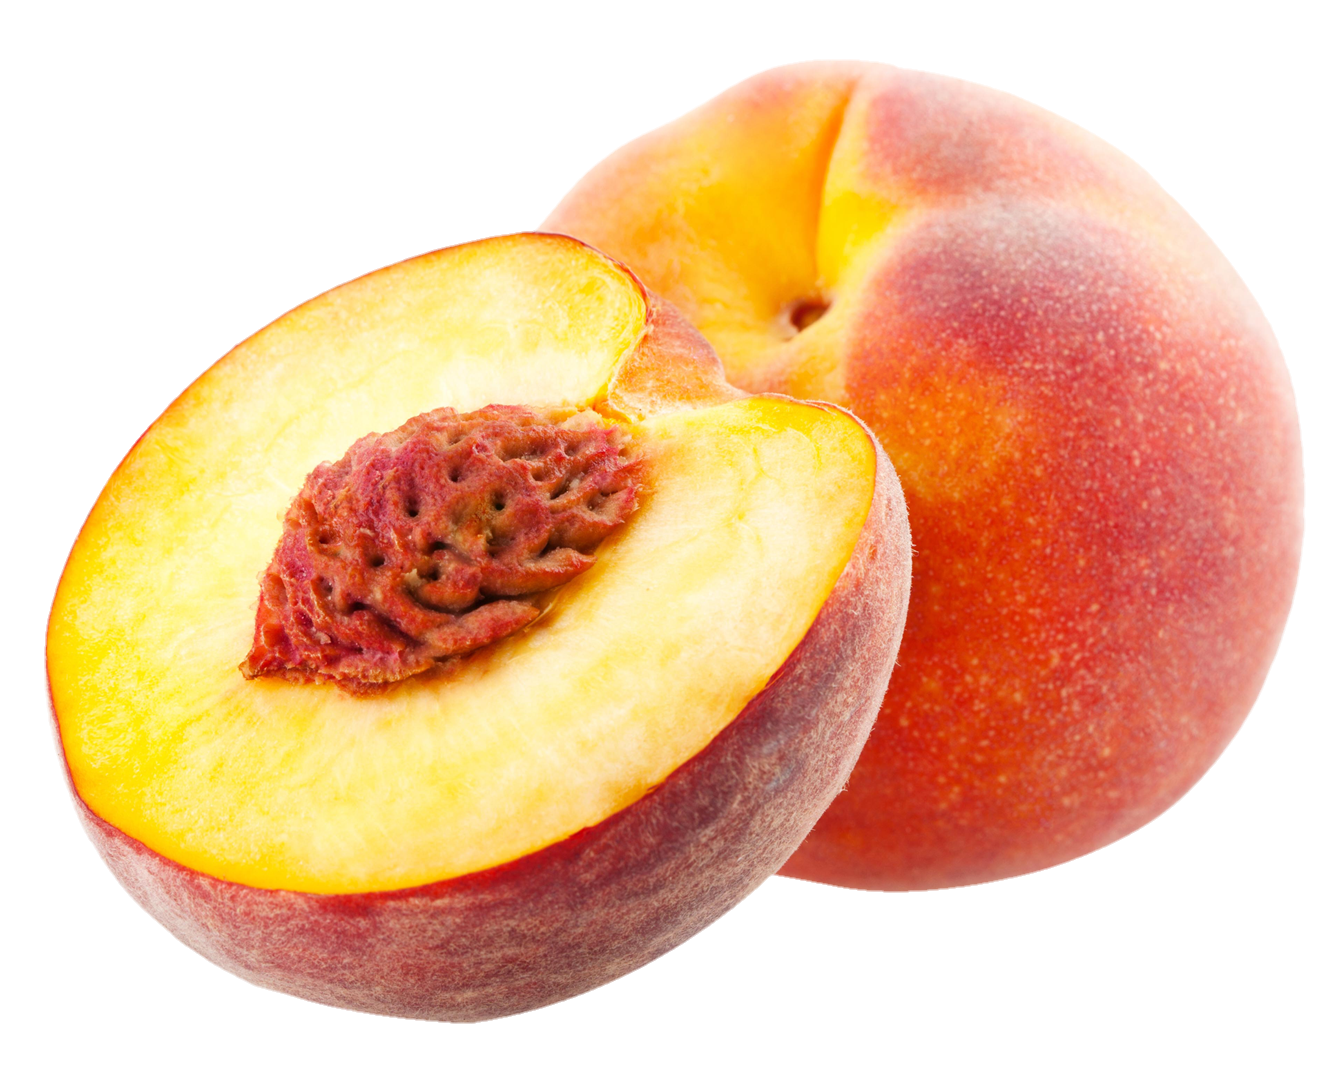 peach-png-image-from-pngfre-33